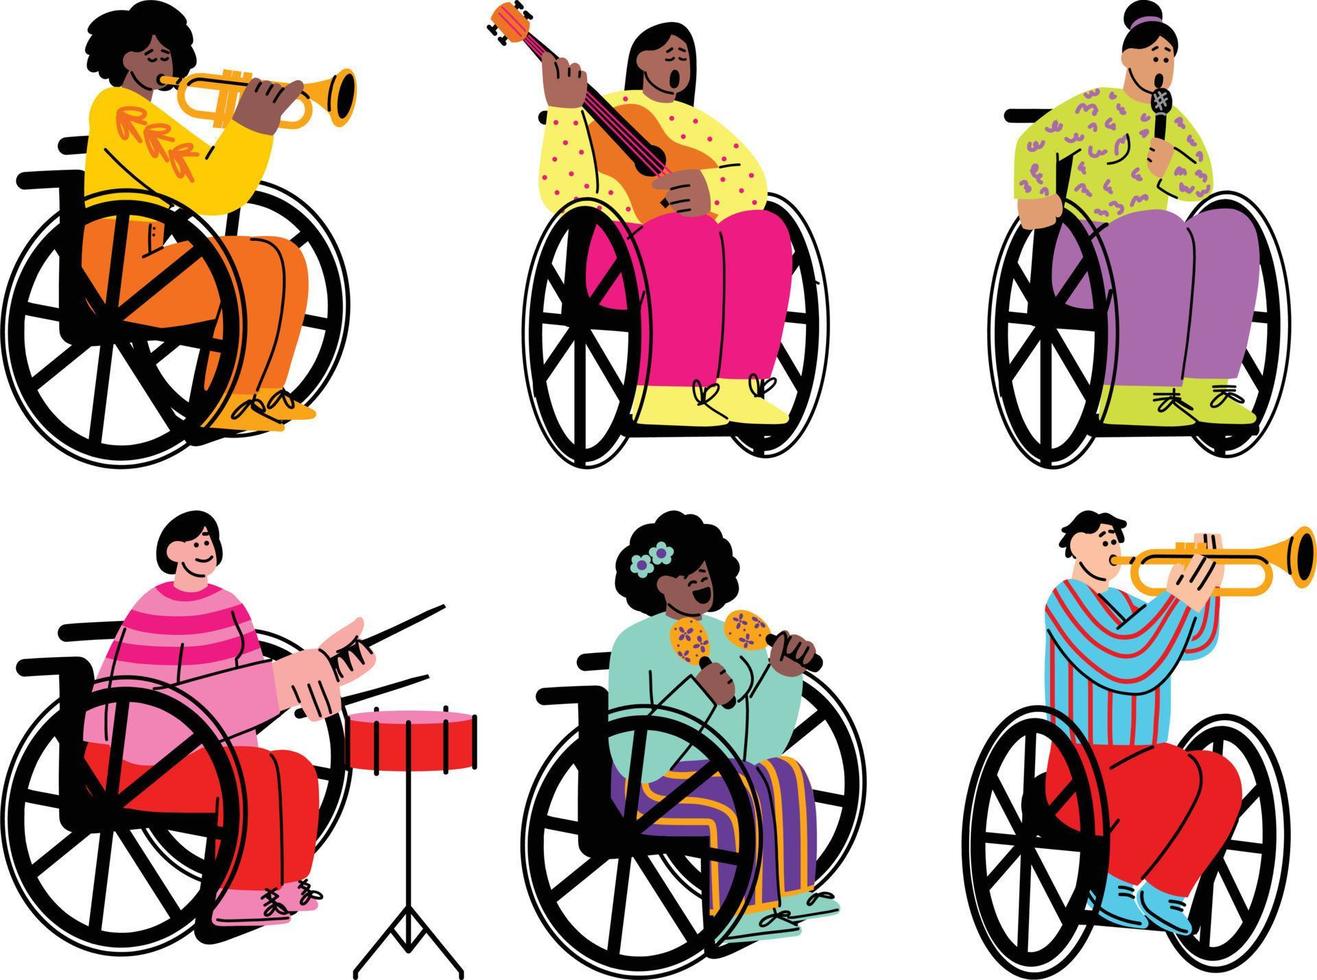 Disabled people in wheelchair playing musical instruments, flat vector illustration isolated.